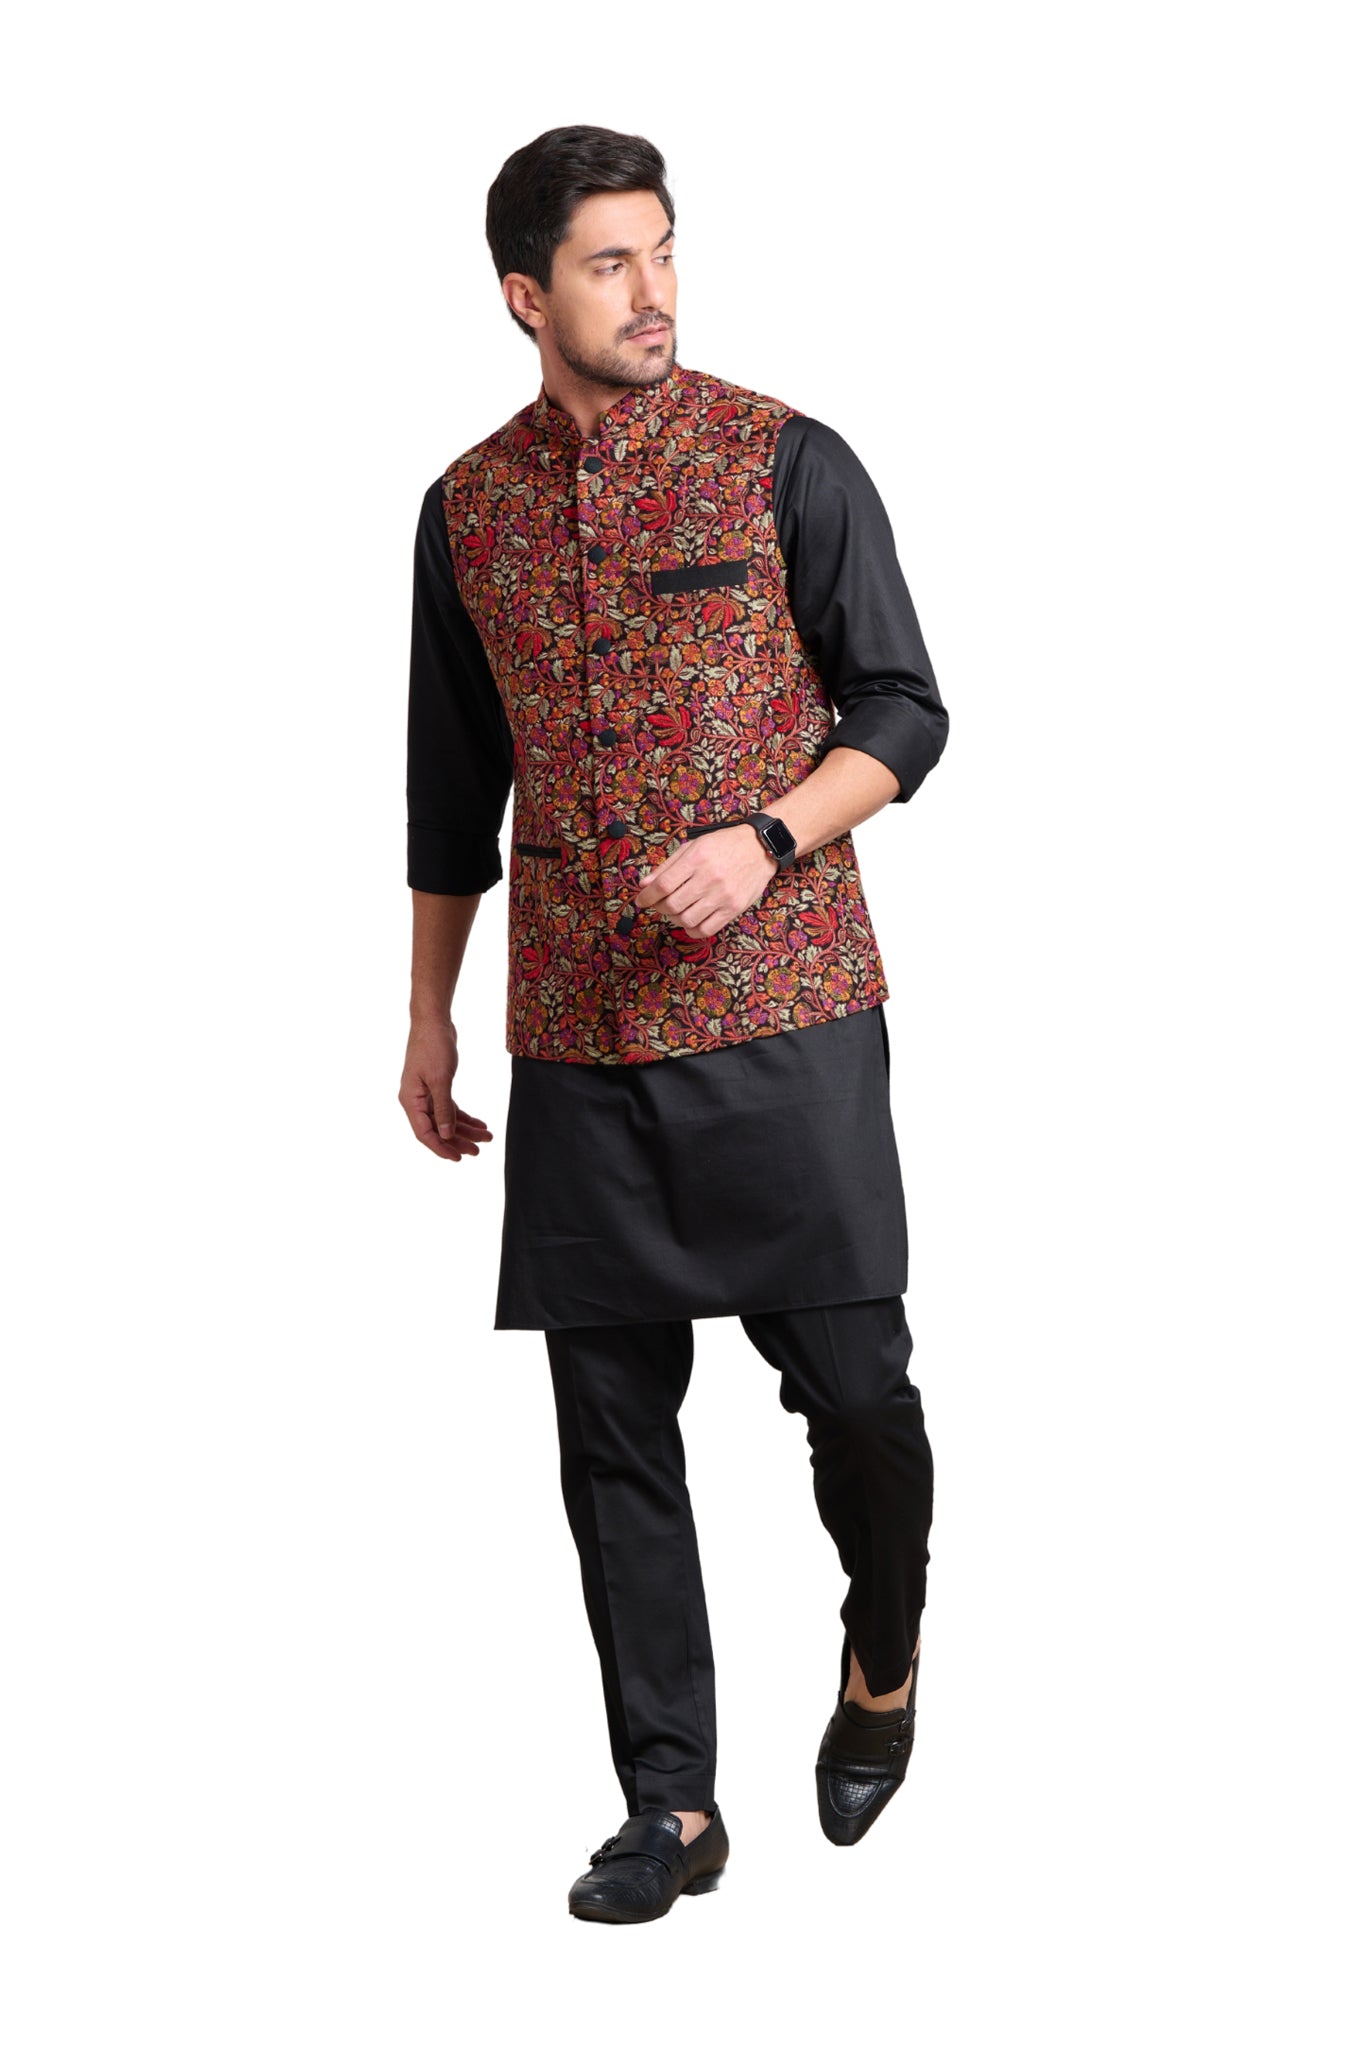 What is the pure gujrati dressing style? - Quora